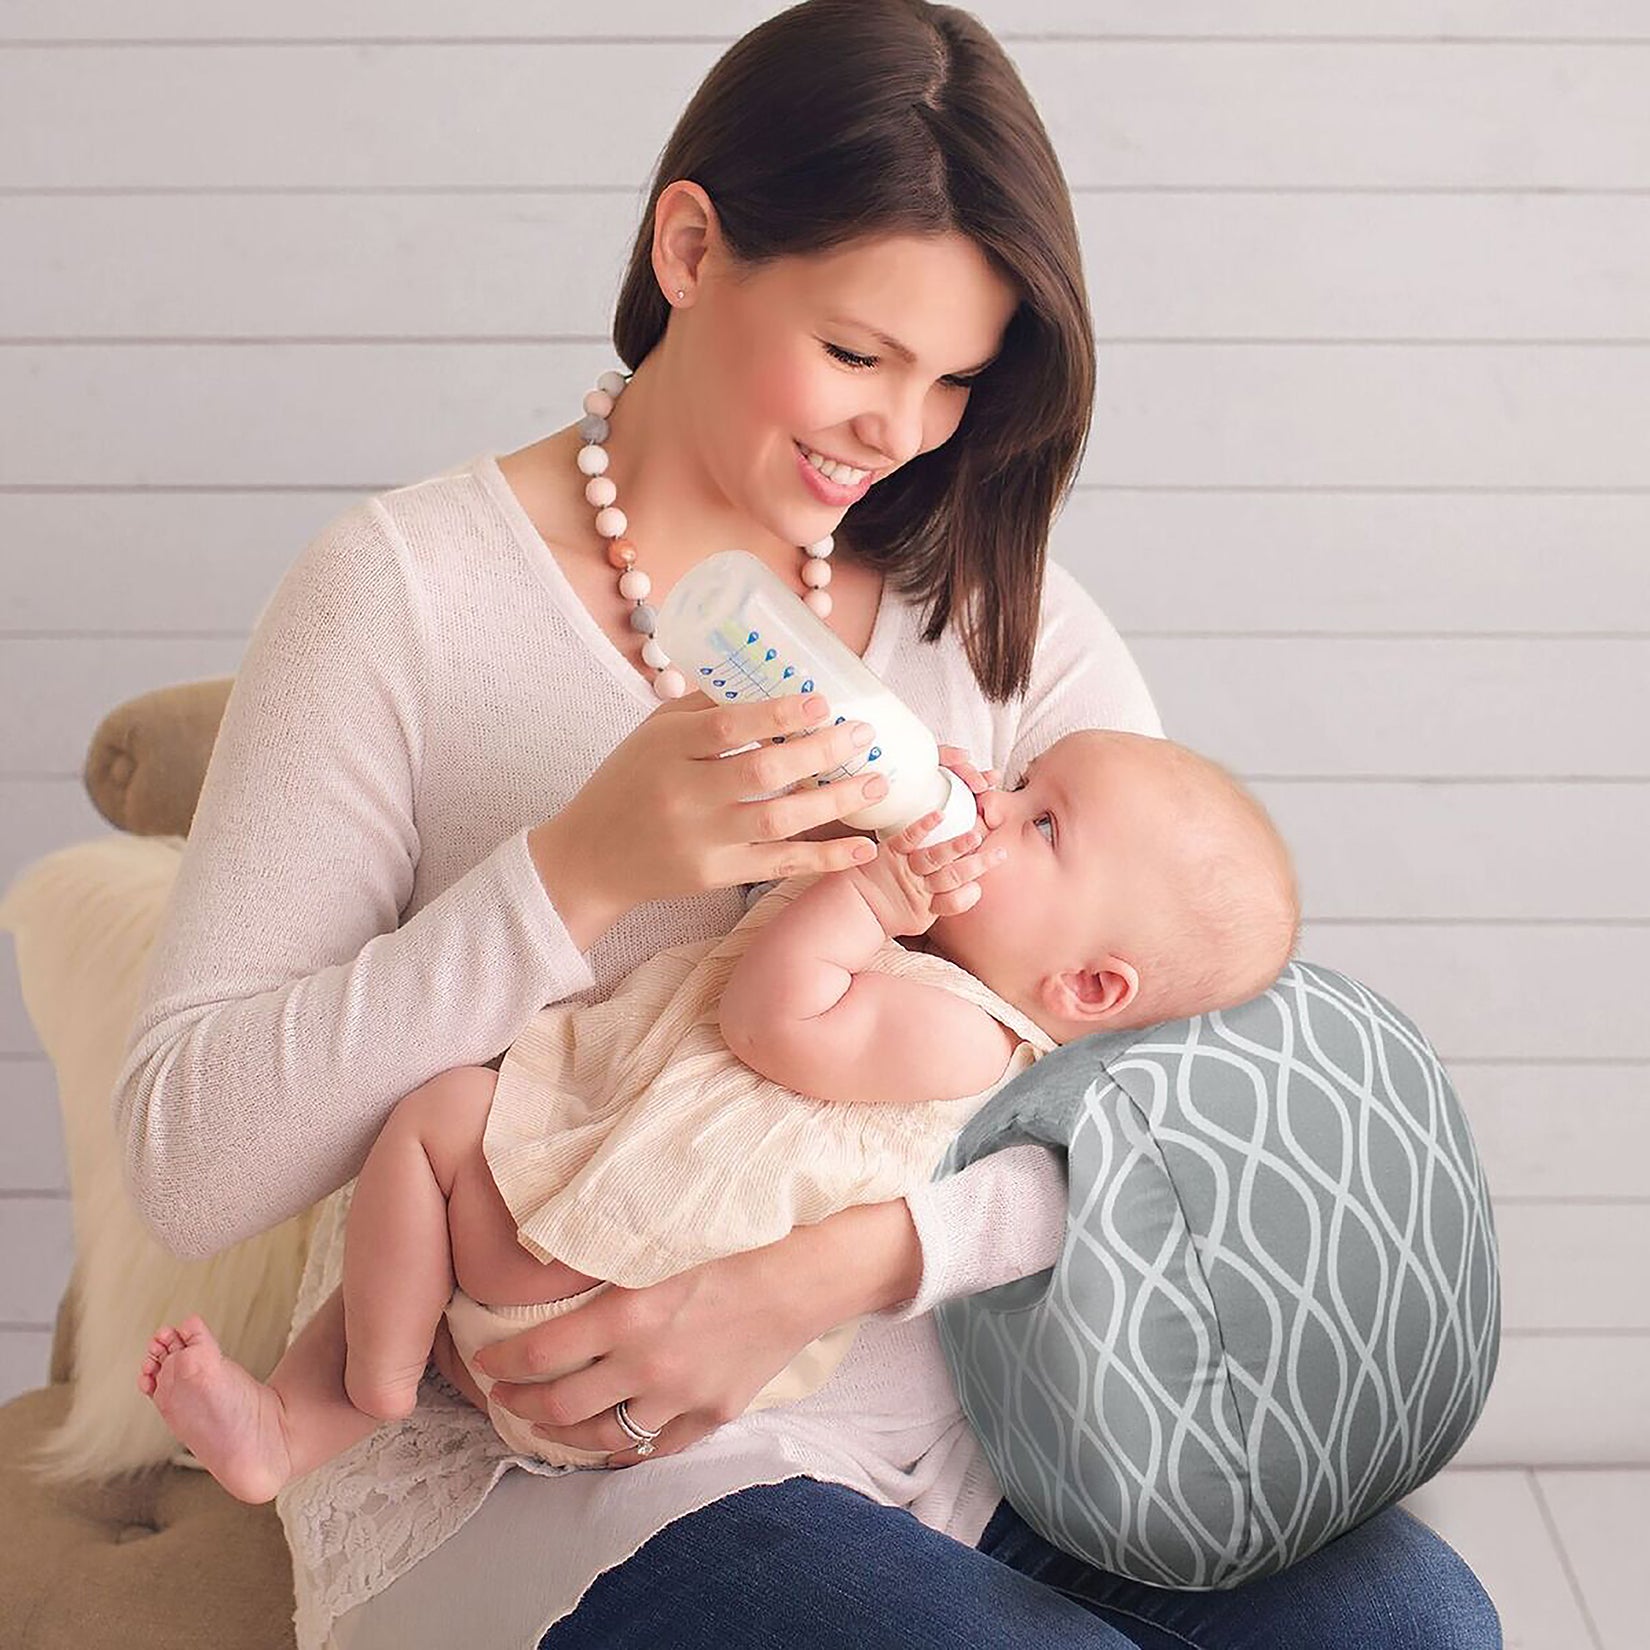 Nursing Station Essentials: The Best Products for Breastfeeding